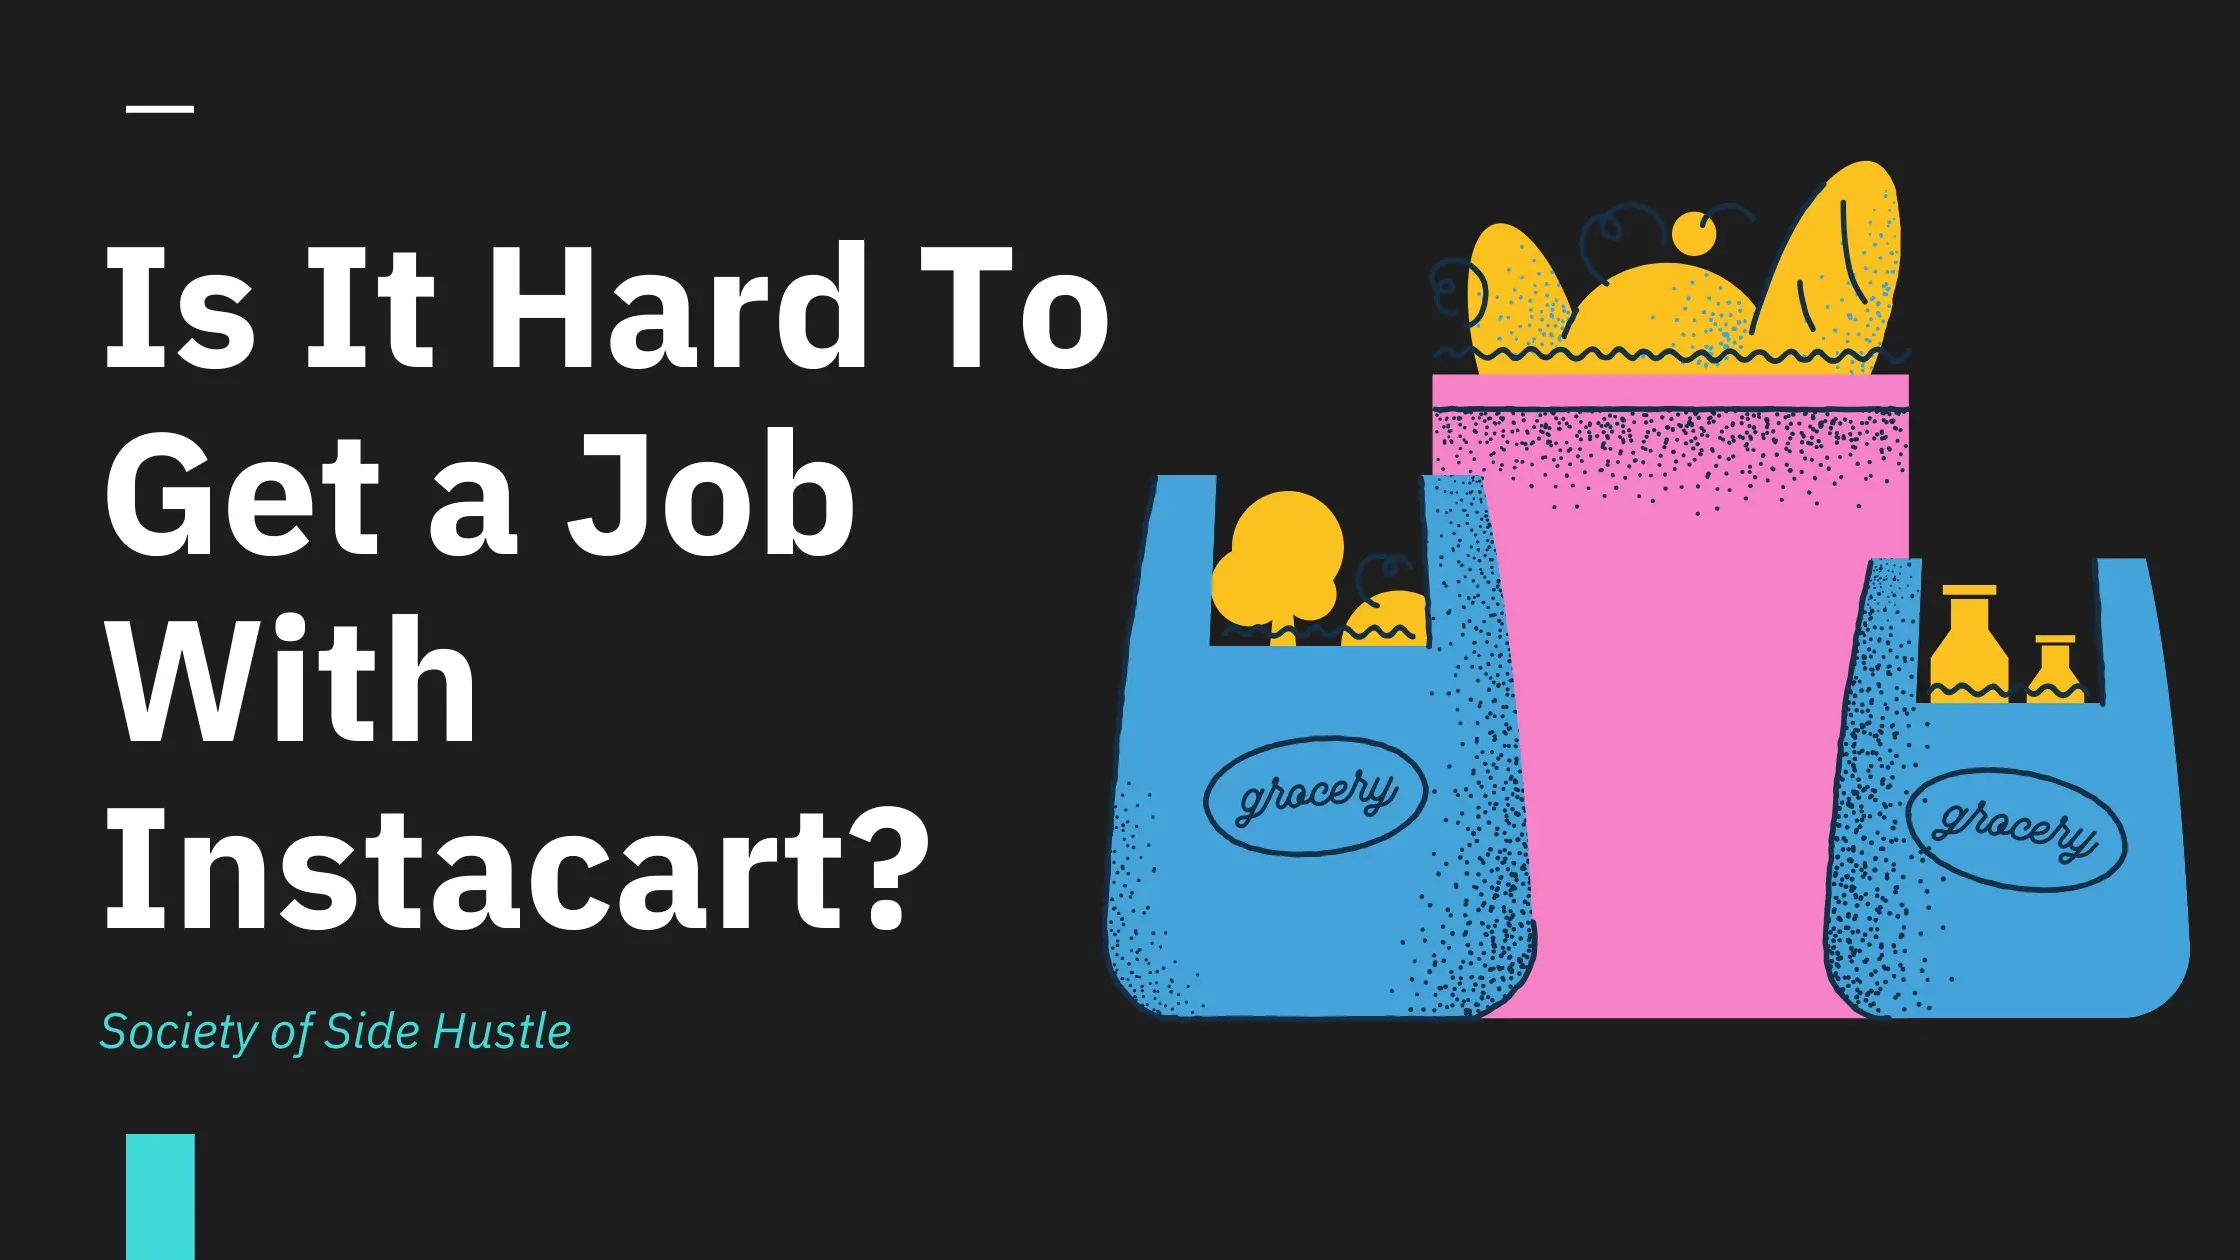 How Hard Is It To Get a Job With Instacart?